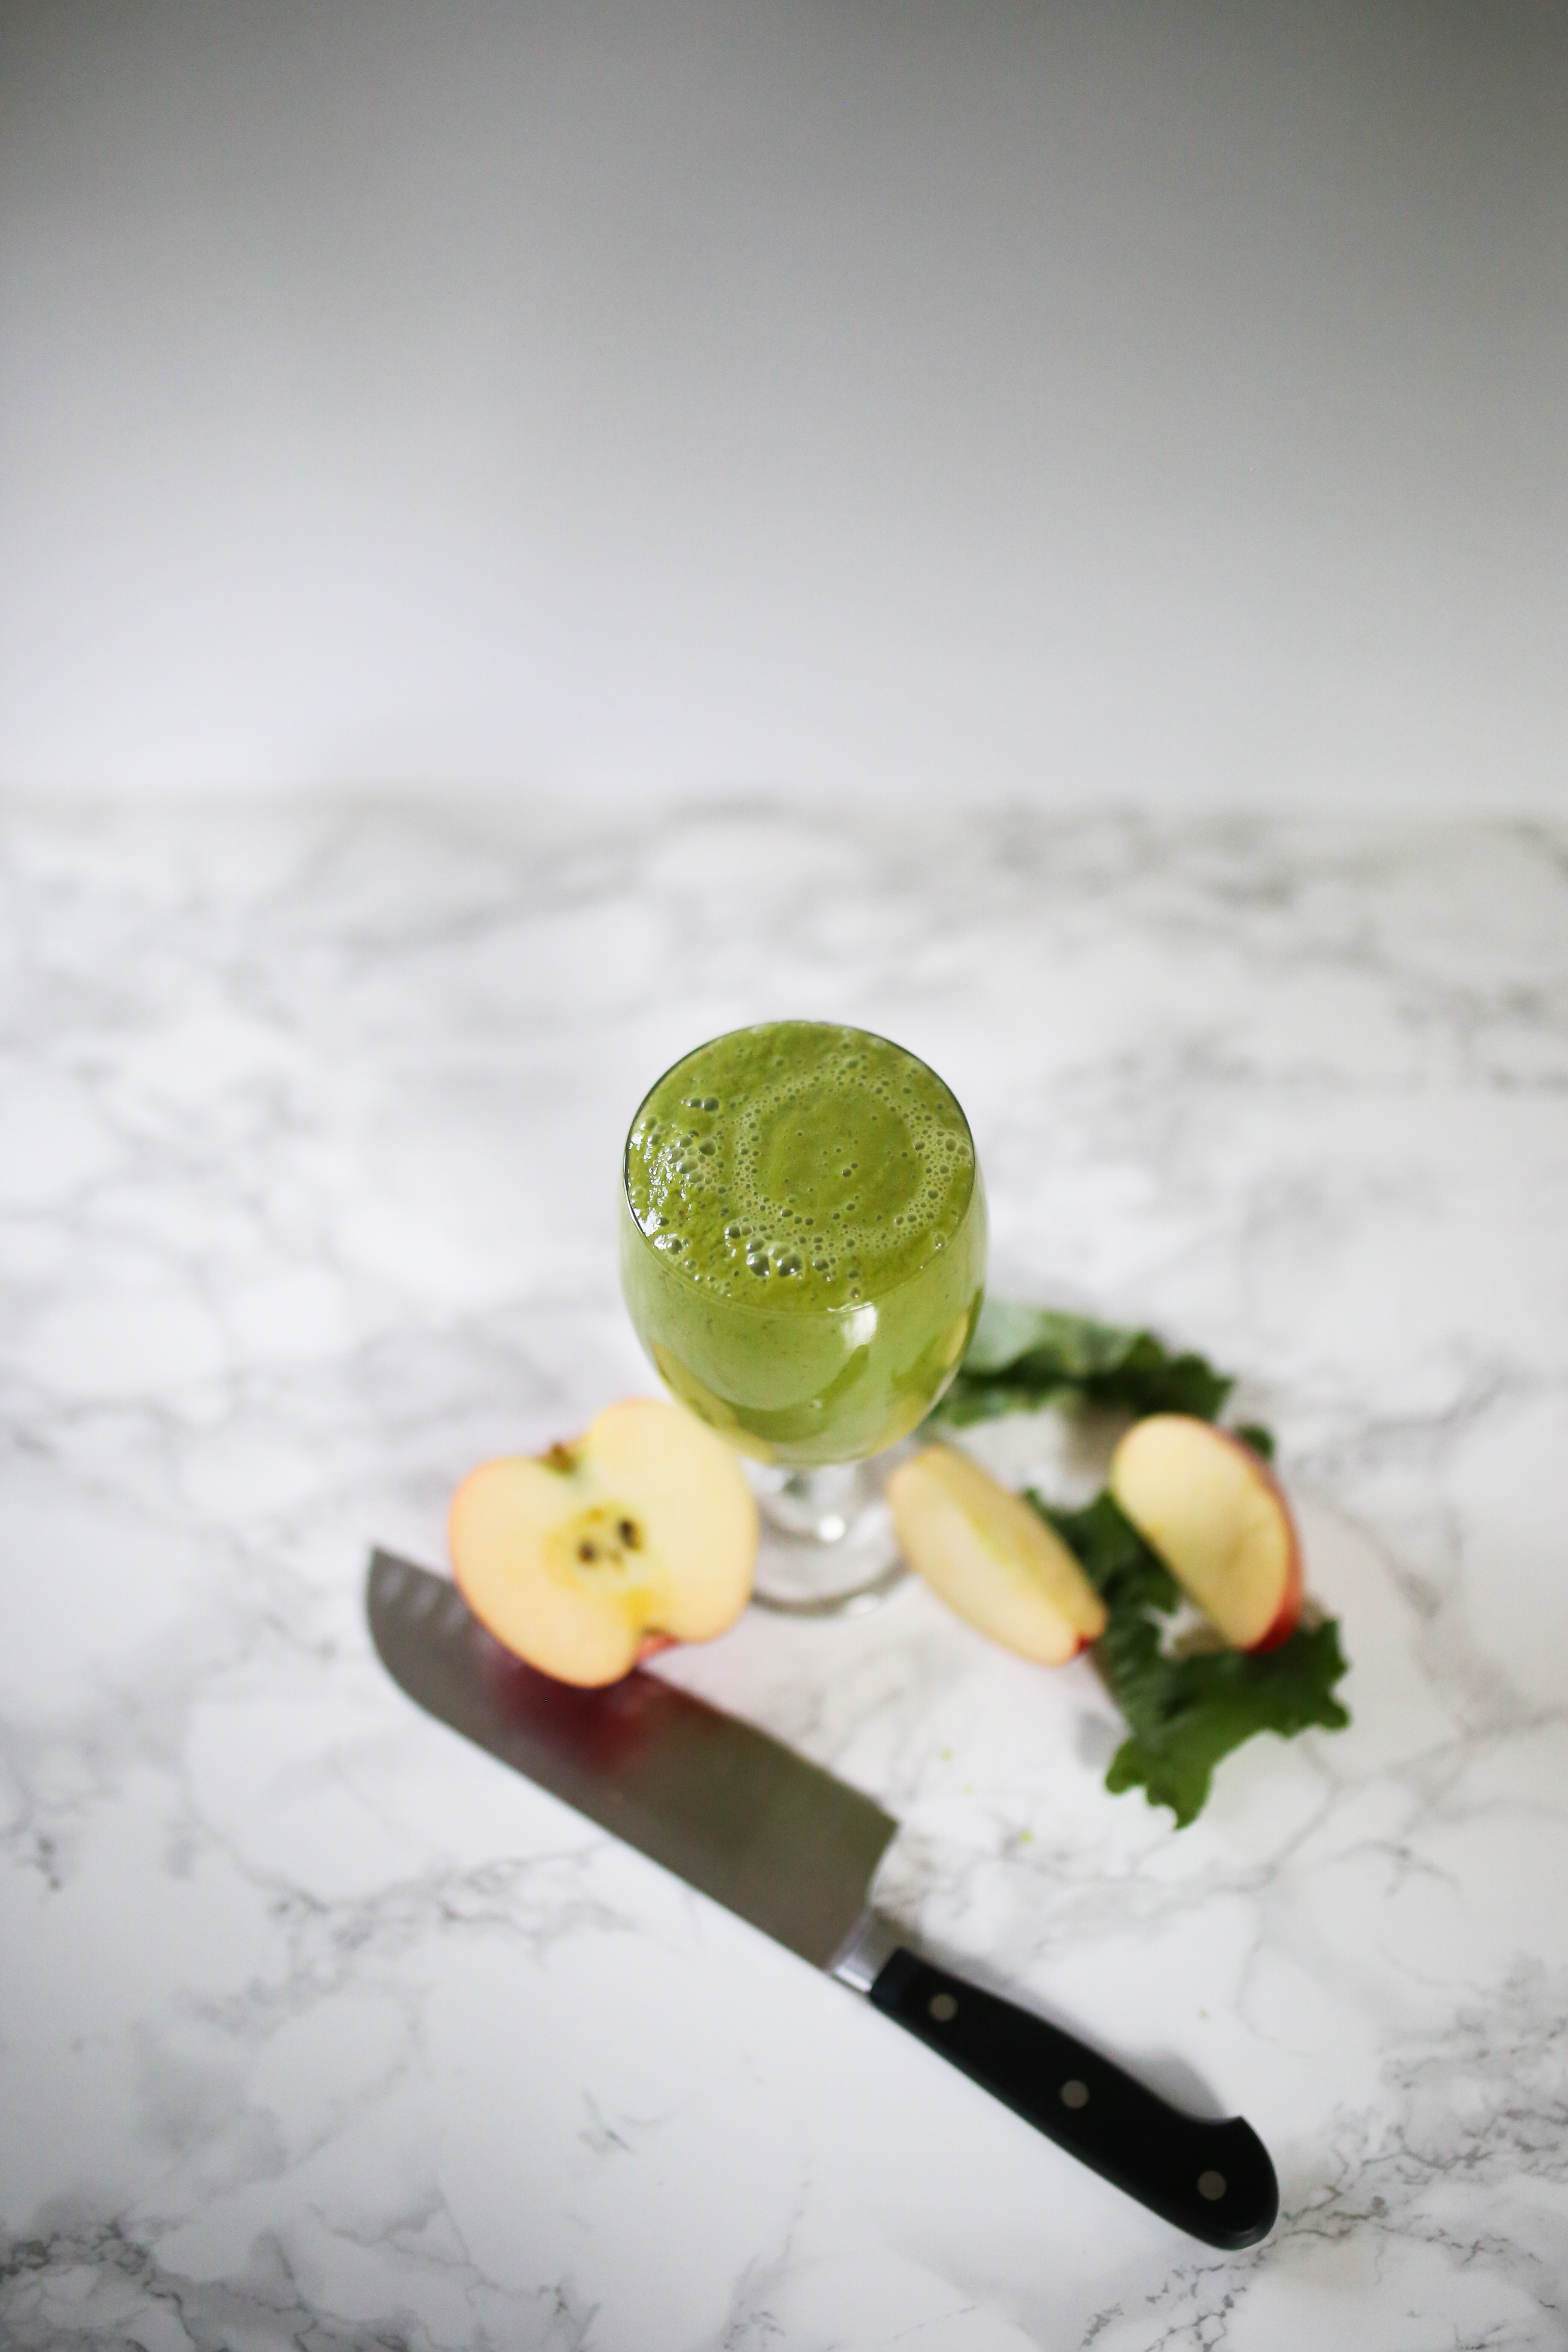 green pineapple apple smoothie in glass. Apples and knife on counter. Shot from above.